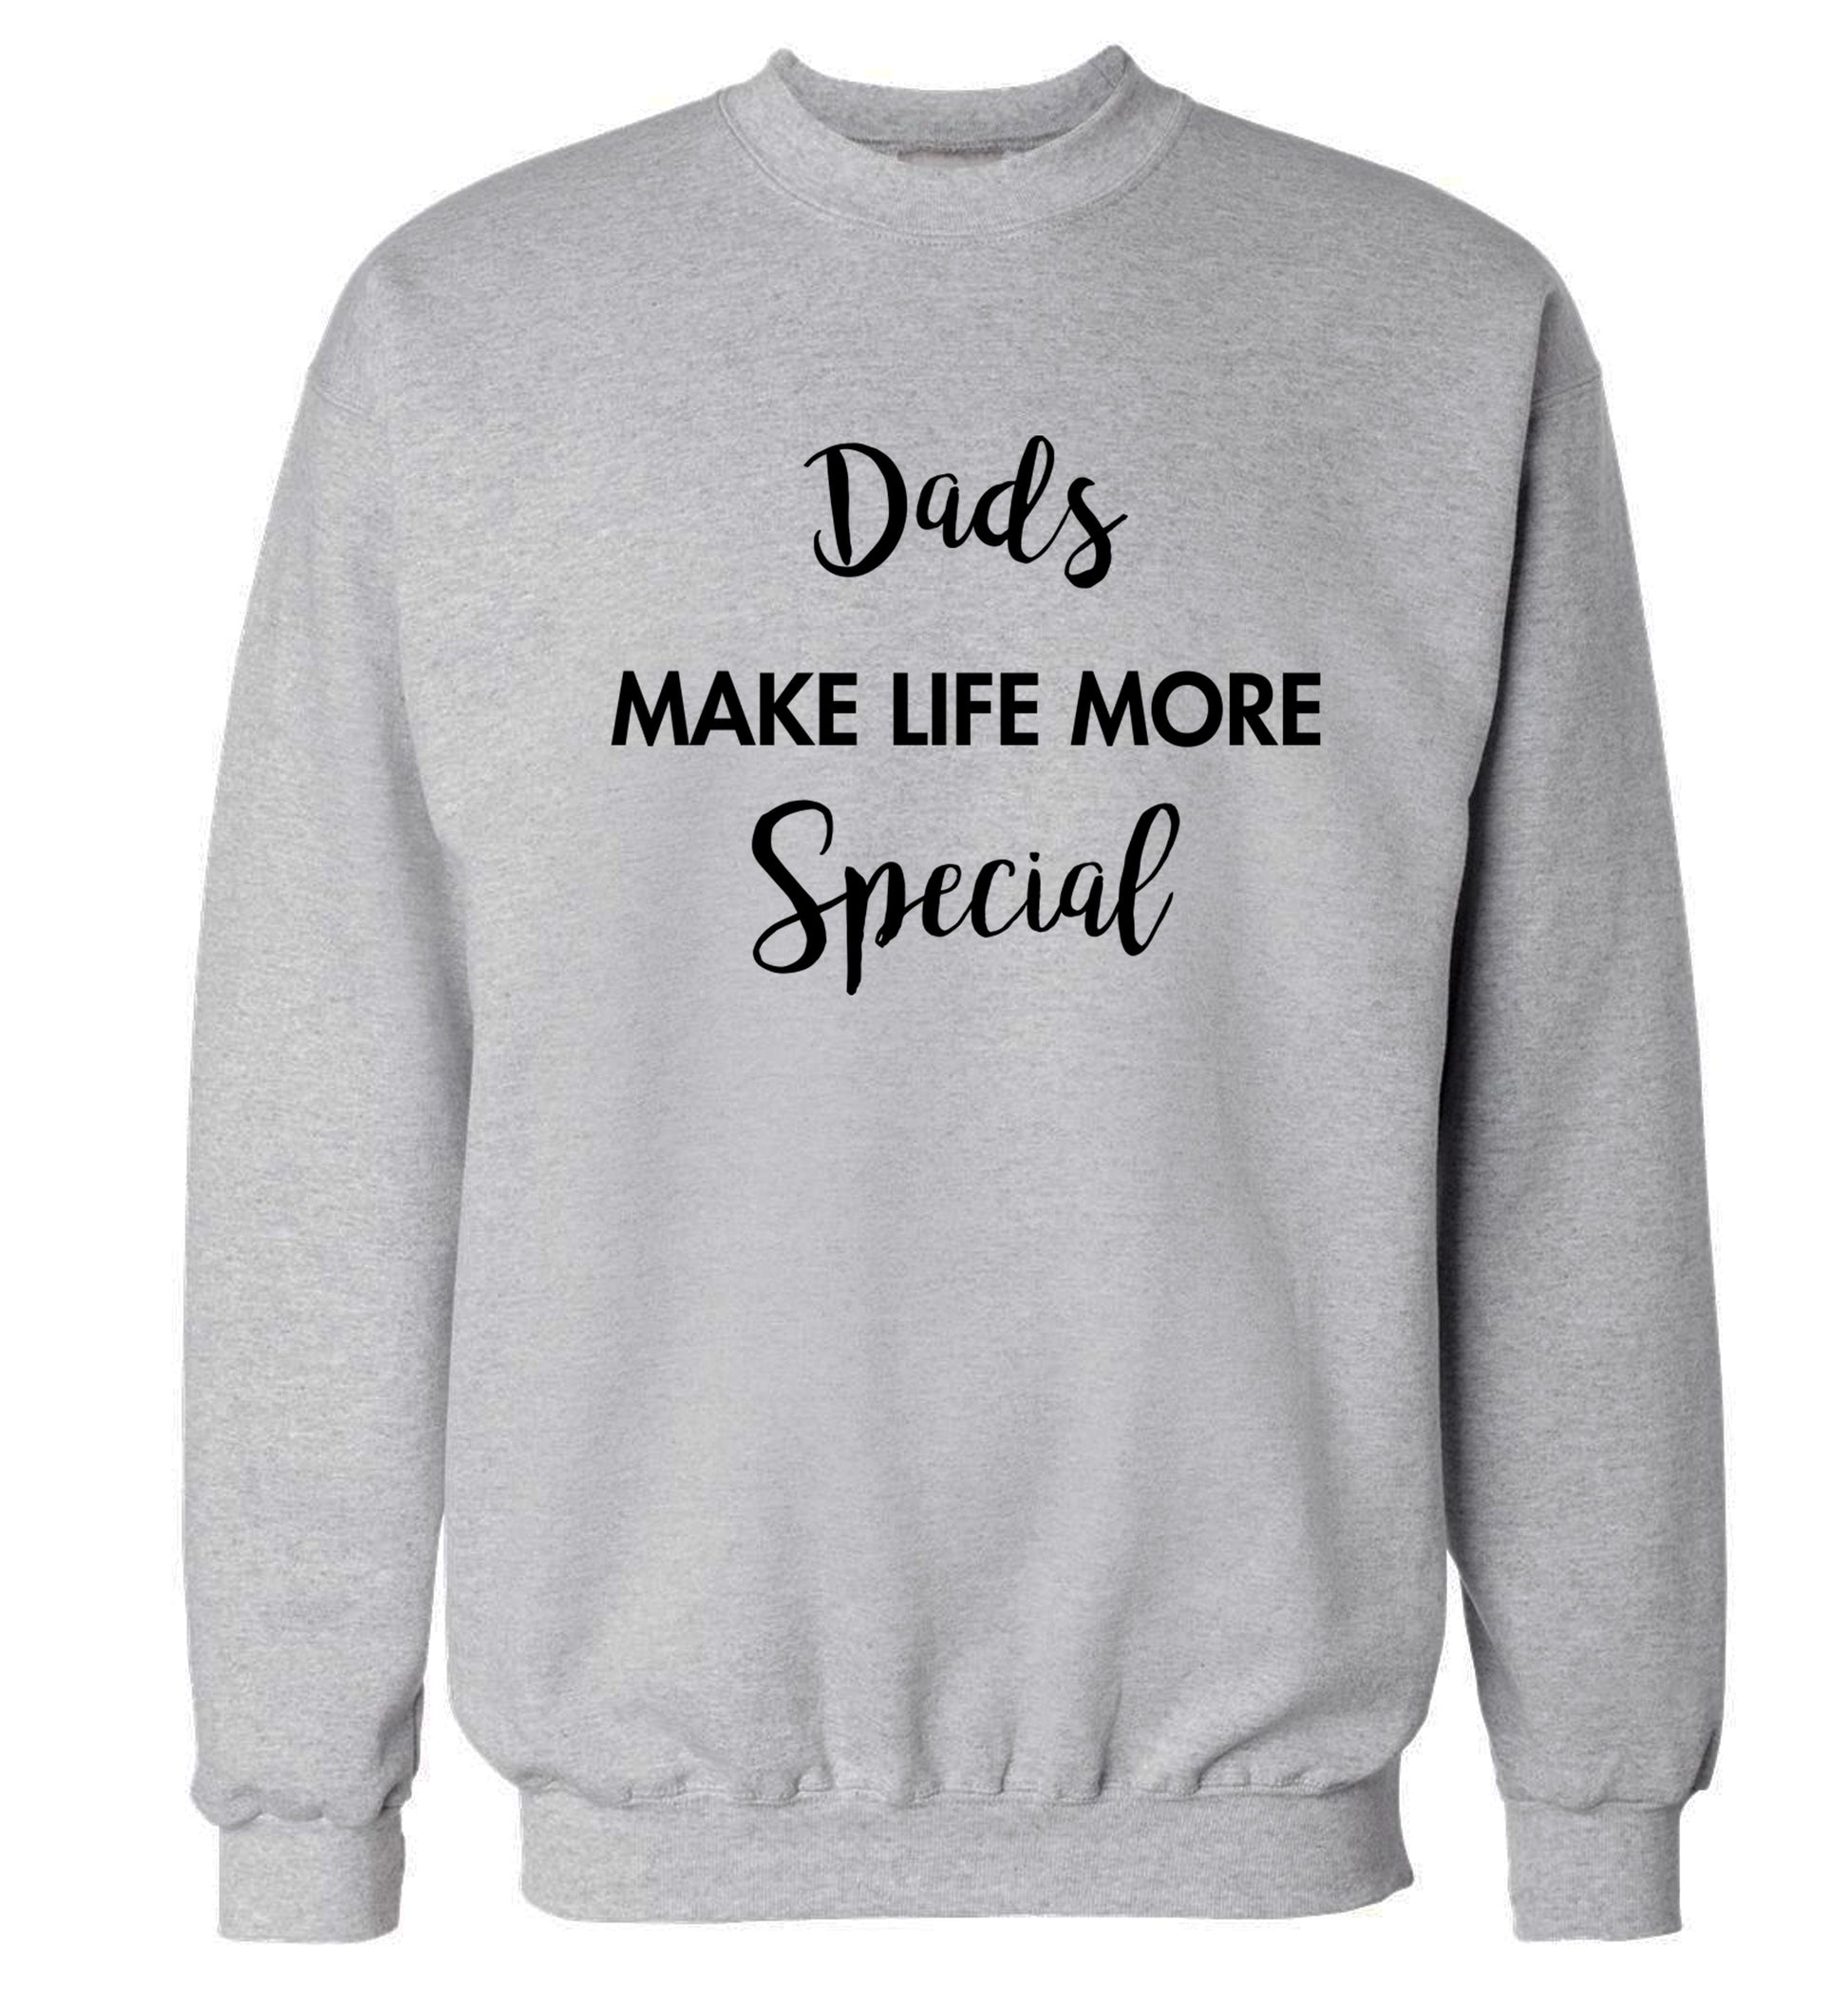 Dads make life more special Adult's unisex grey Sweater 2XL